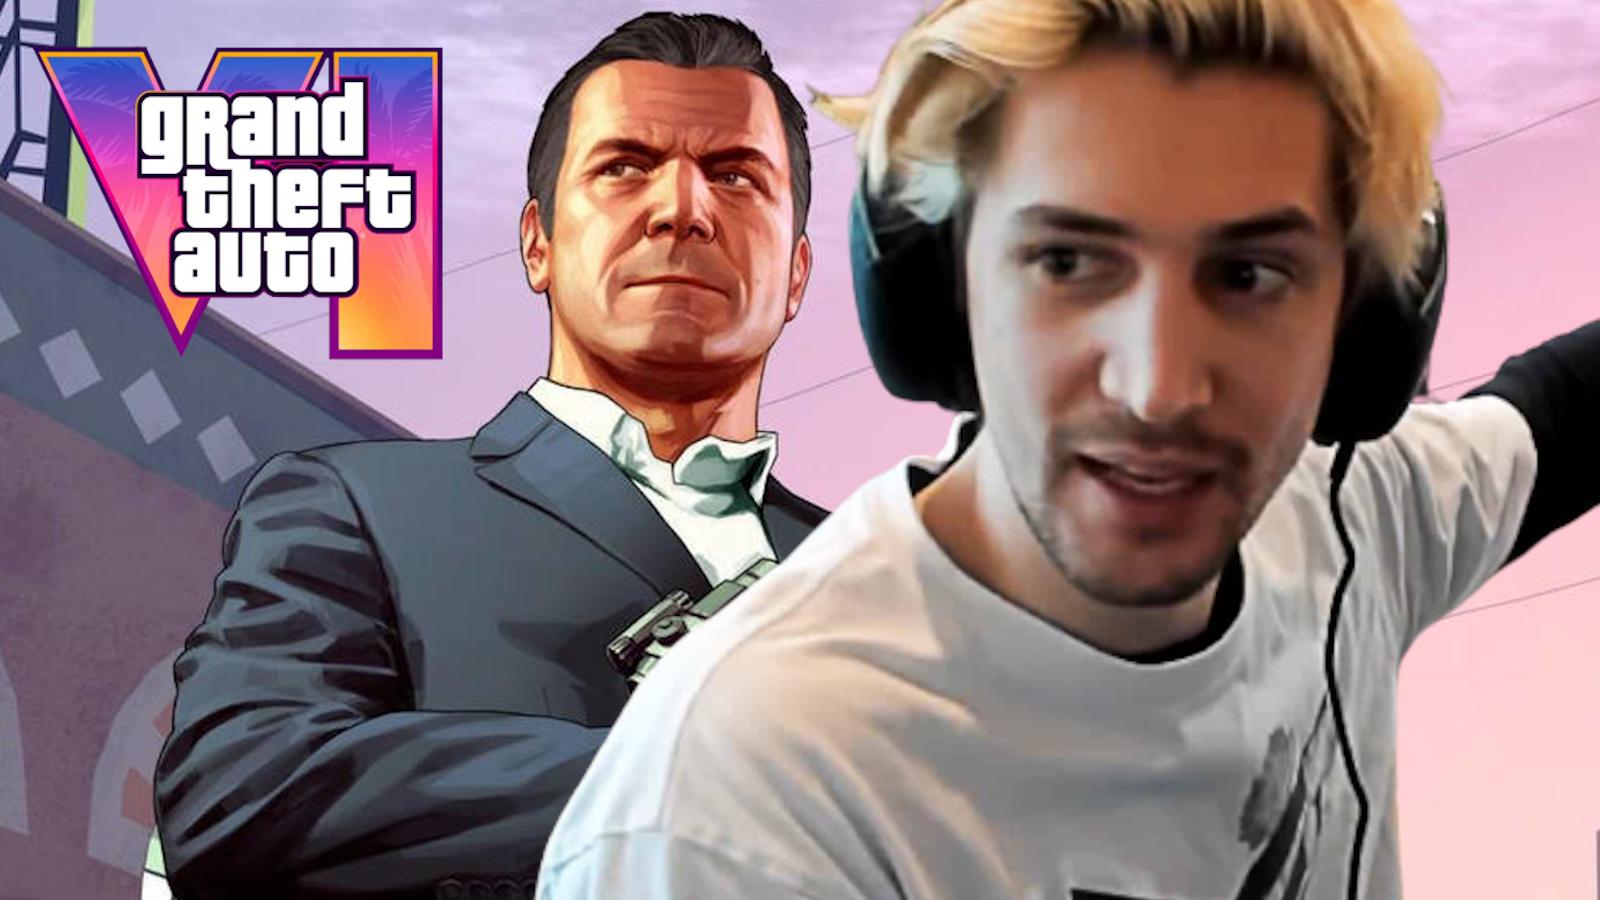 michael from gta 5 with xqc wanting gta 6